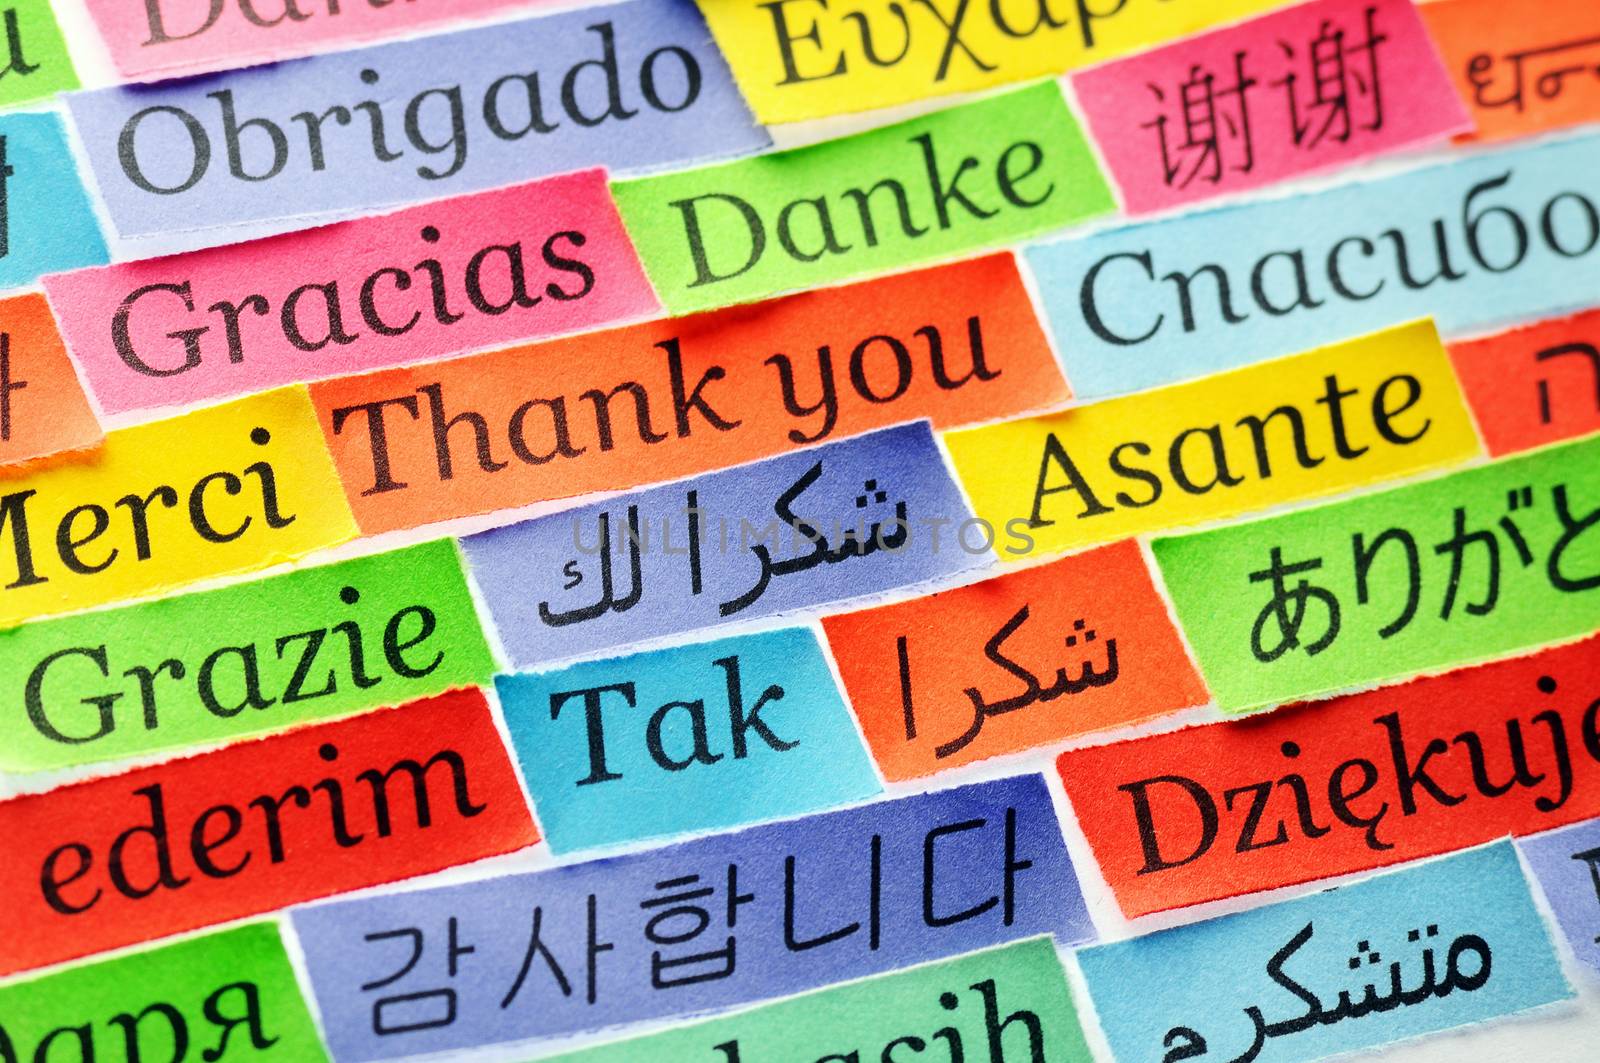 Thank You Word Cloud printed on colorful  paper different languages ,accent on arabic